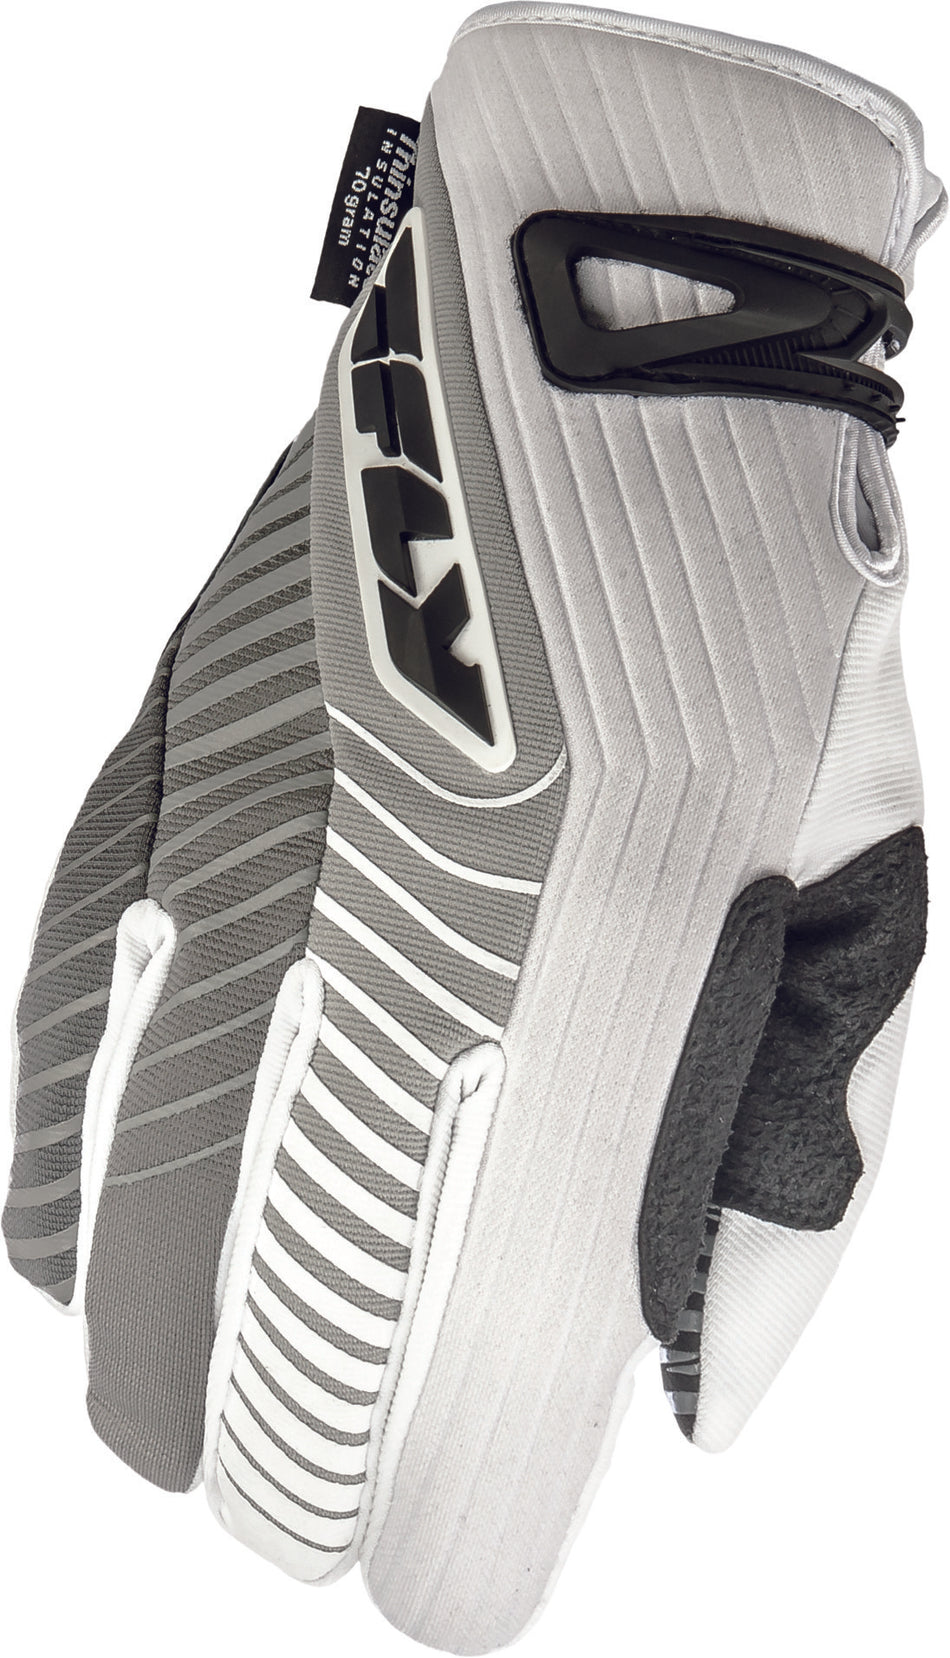 FLY RACING Title Gloves Long White Sz 9 #5884 367-034~09